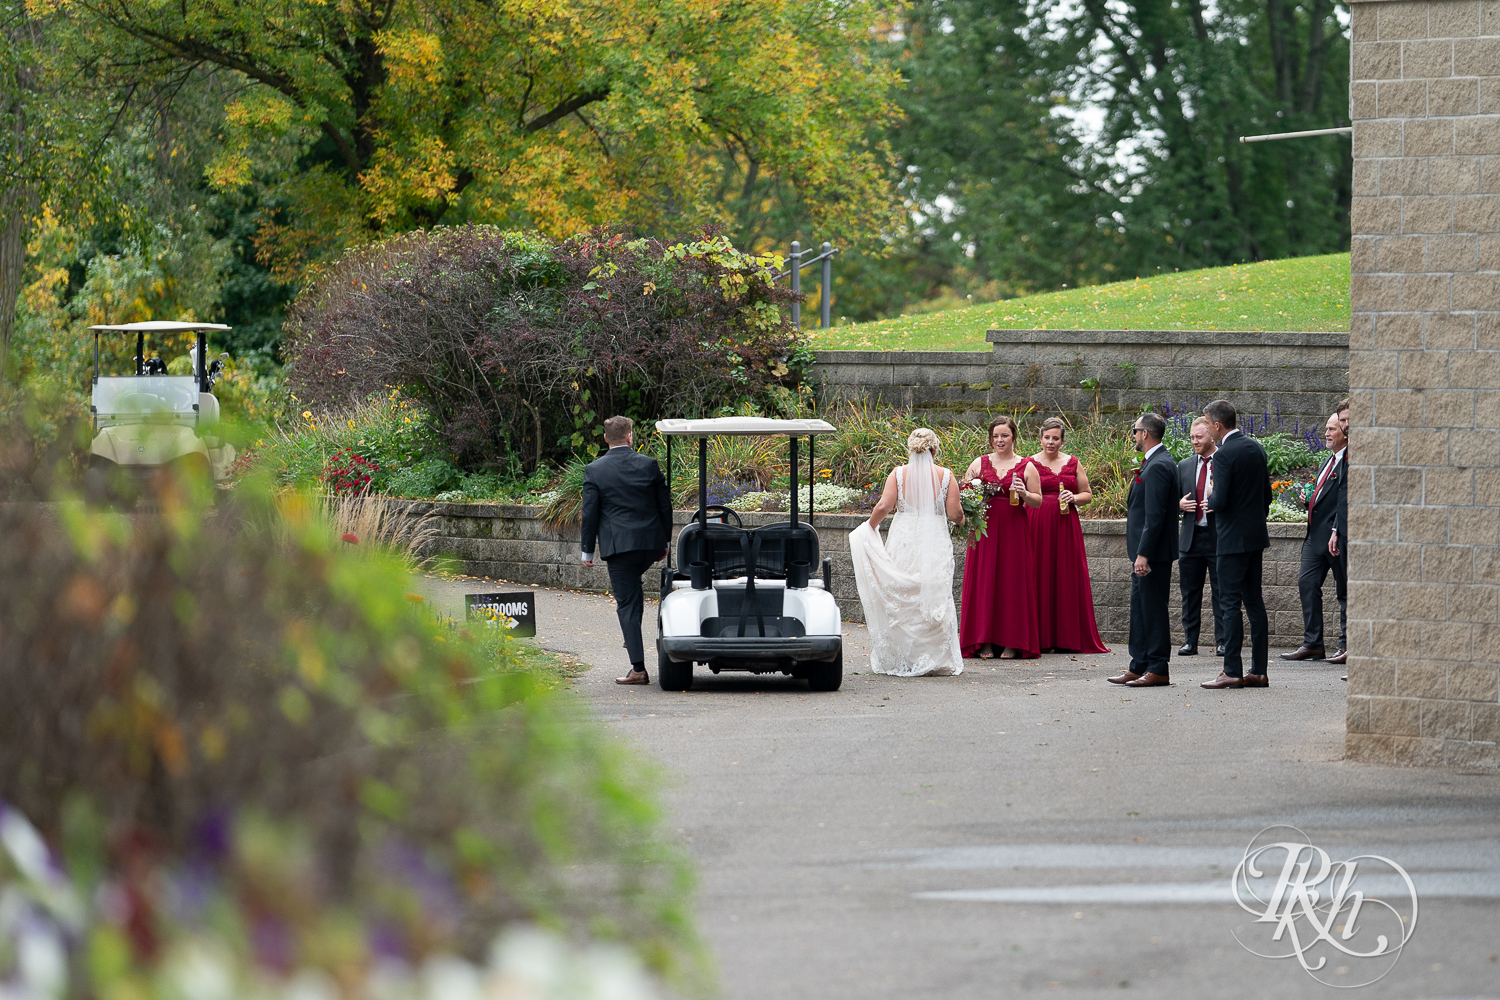 Wedding party in red dresses and black suits at Hastings Golf Club in Hastings, Minnesota.